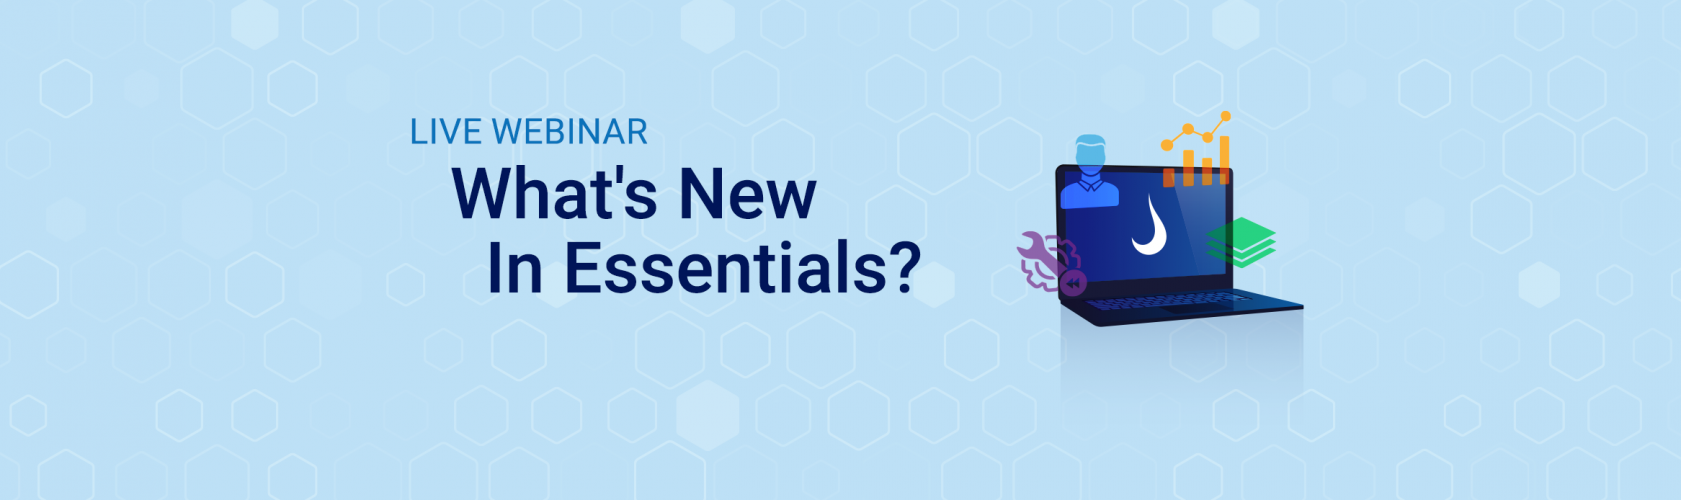 Live Webinar — What's New in Essentials?